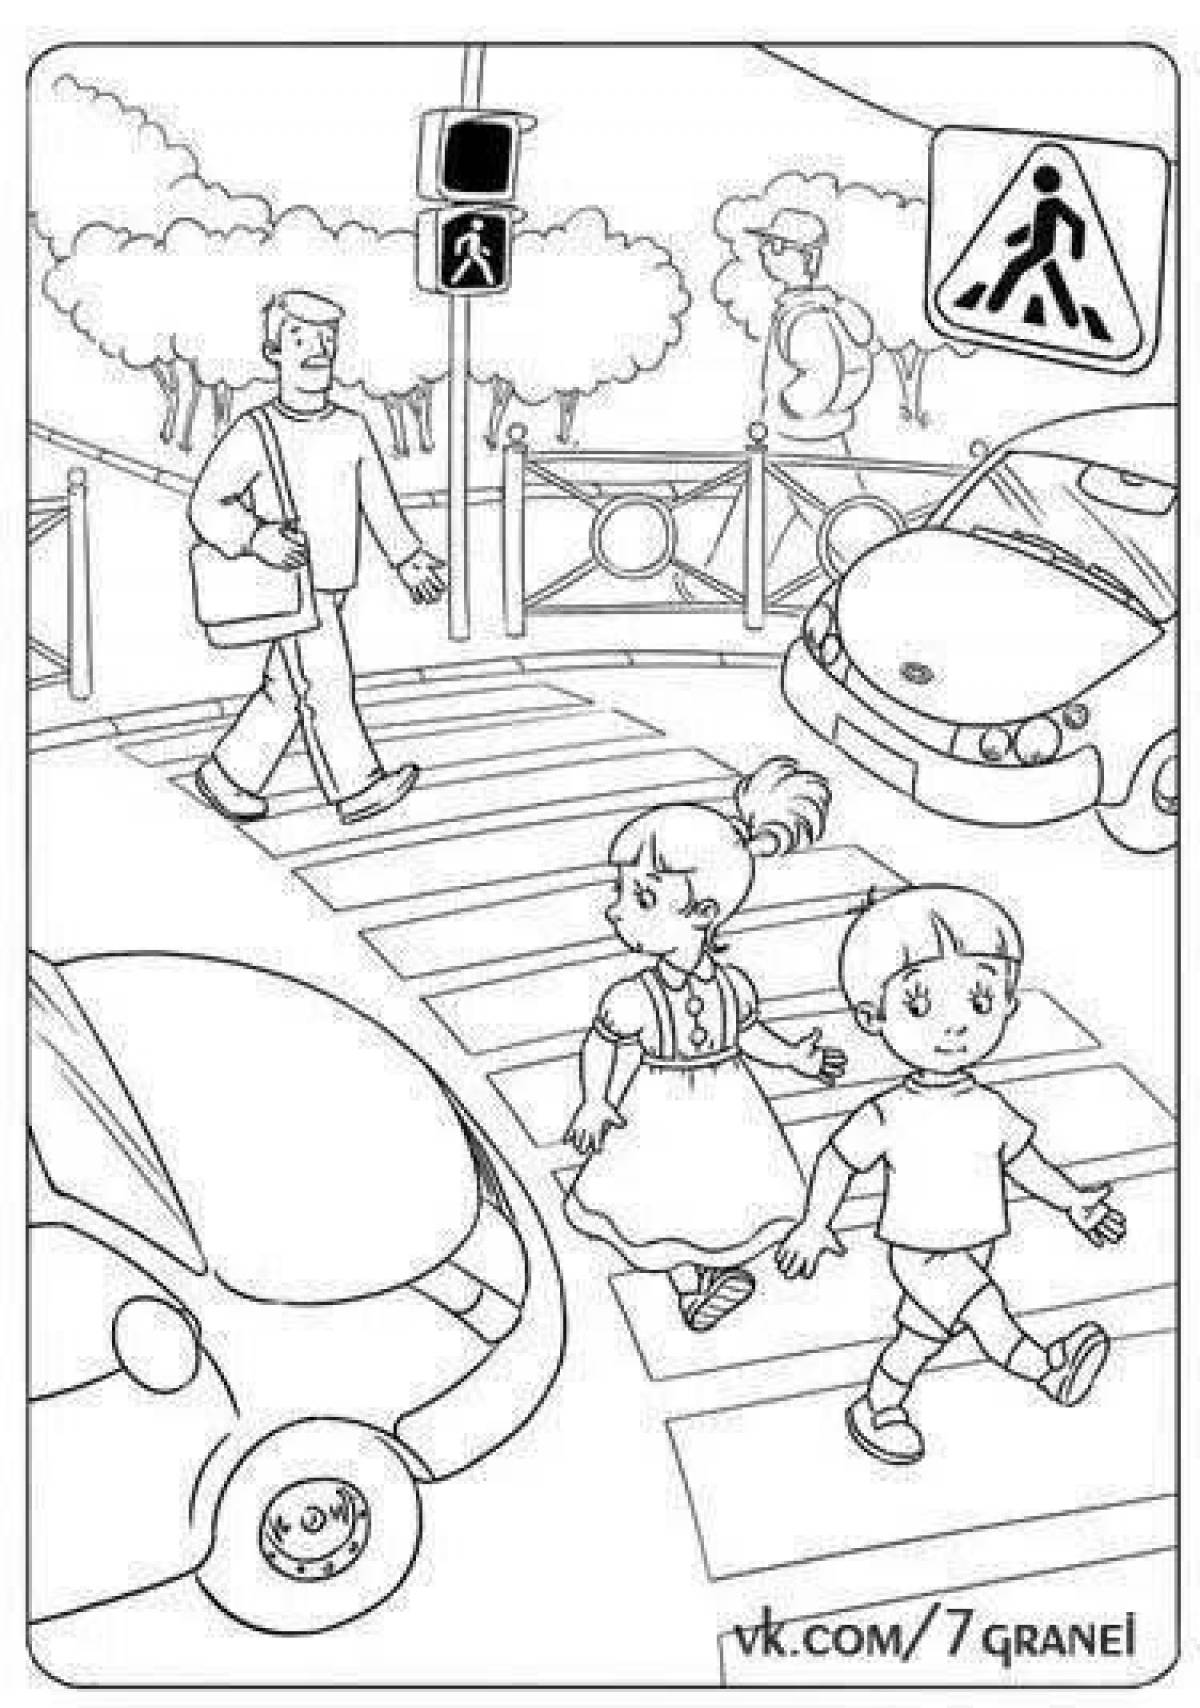 Interesting traffic coloring page